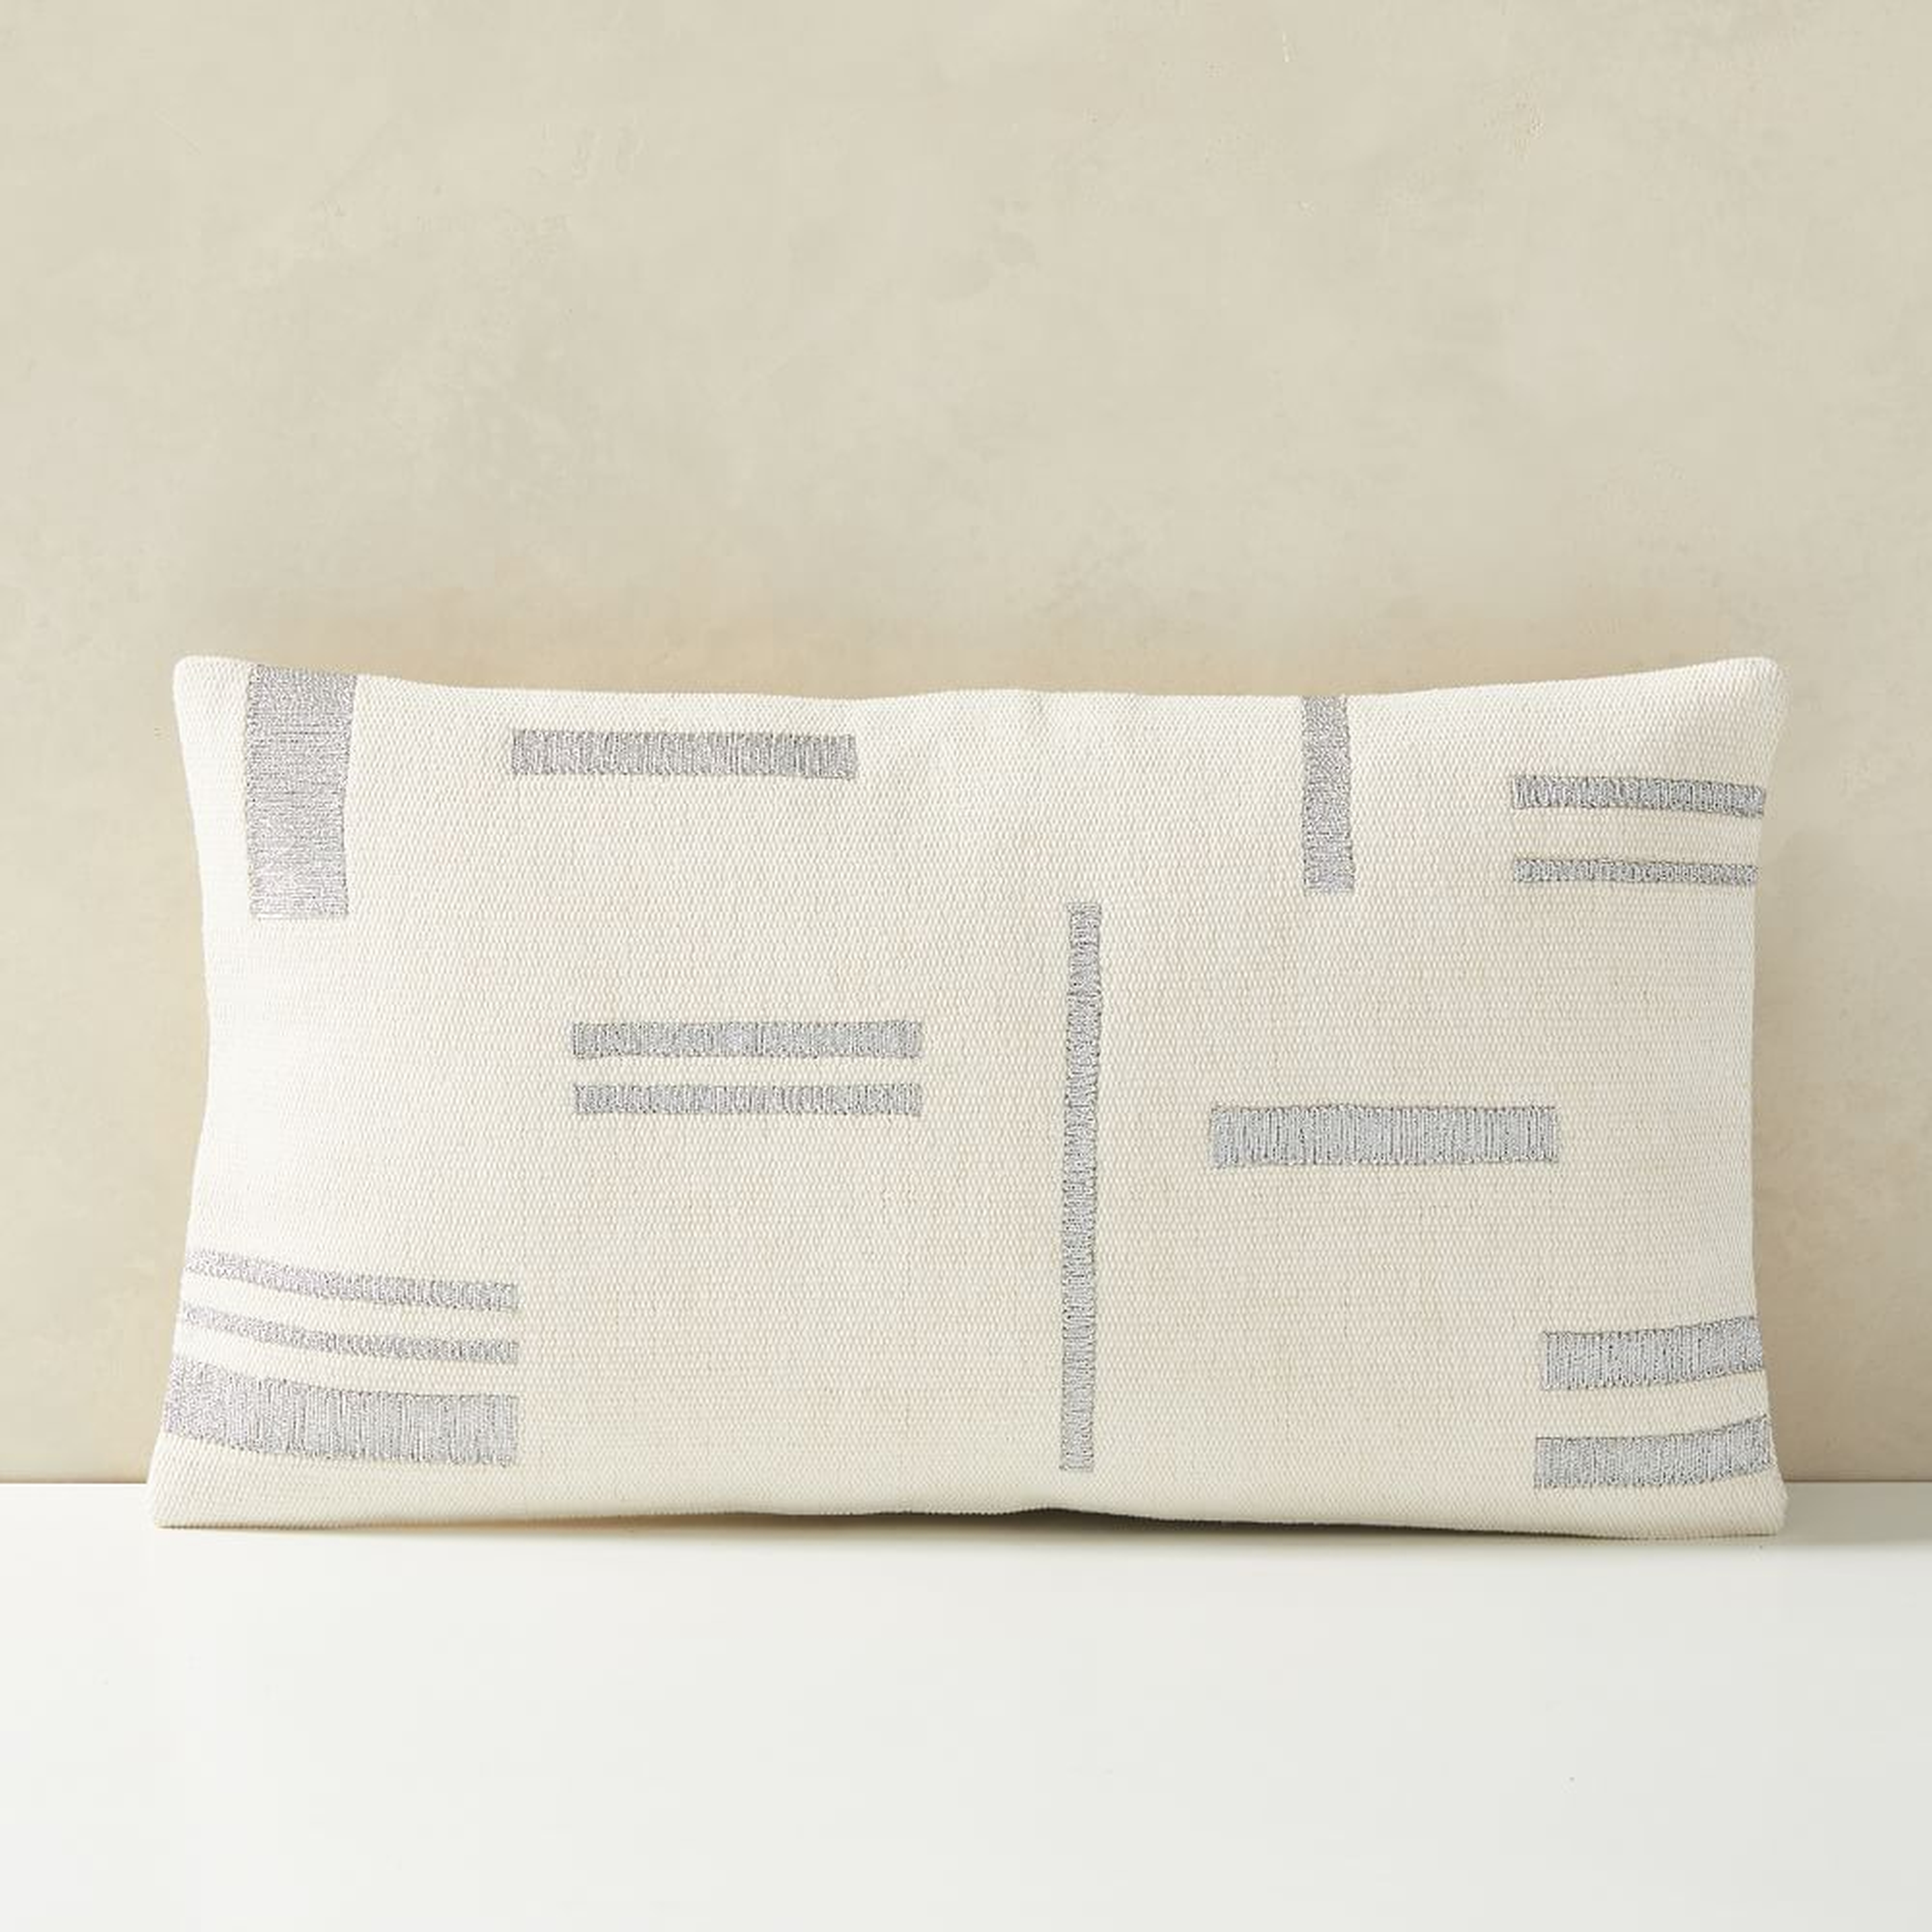 Embroidered Metallic Blocks Pillow Cover, 12"x21", White - West Elm